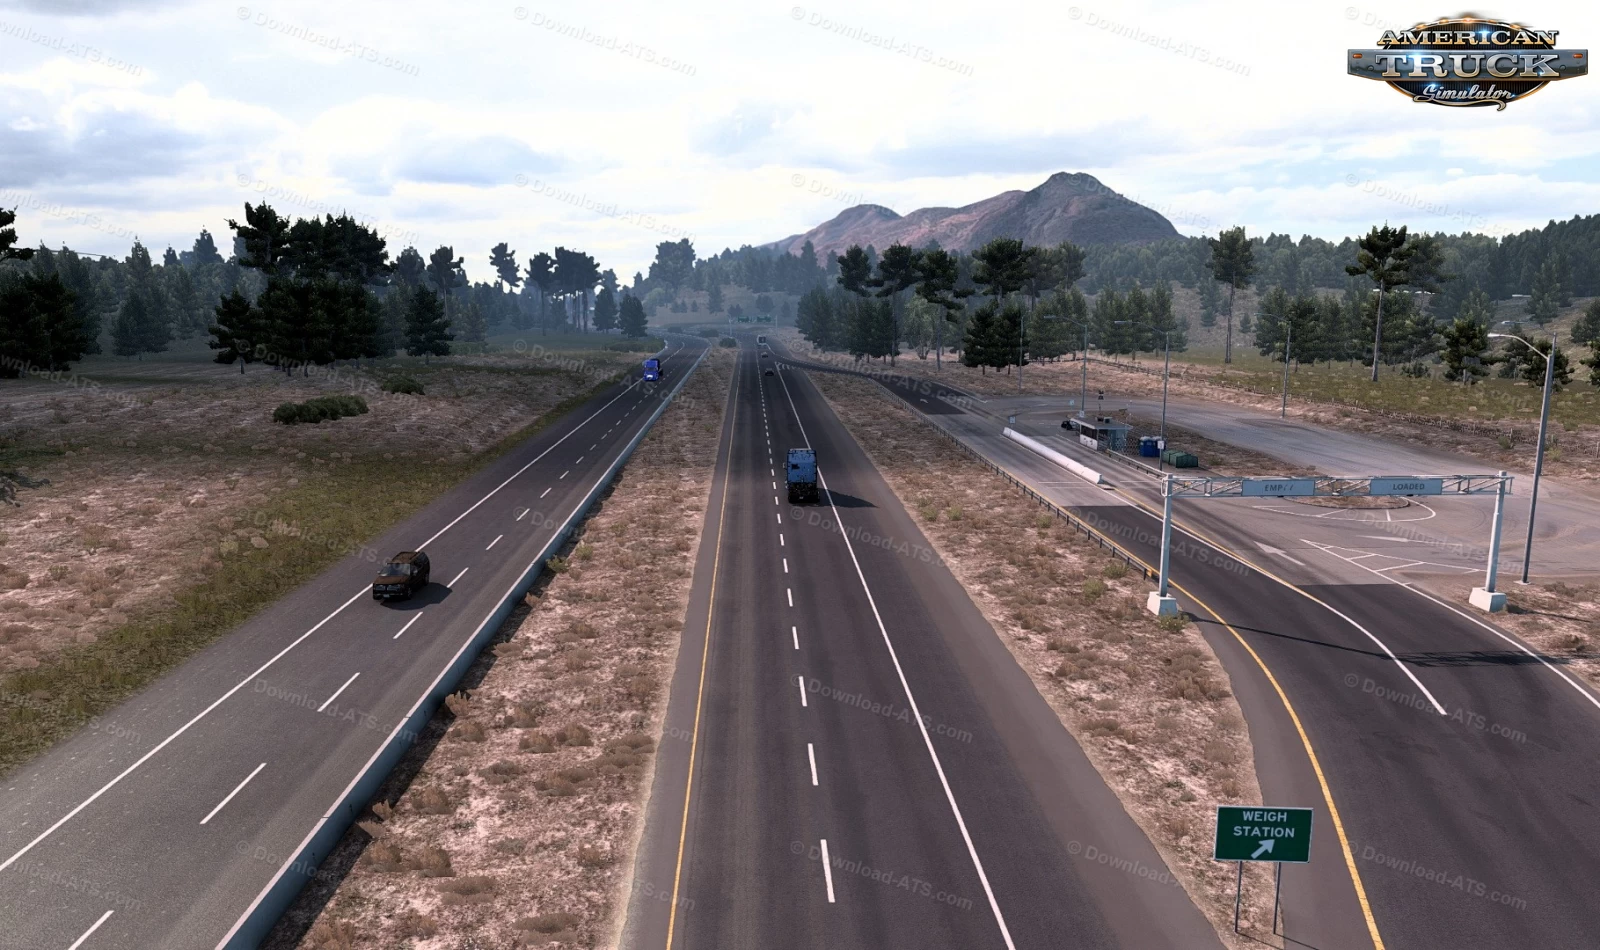 Late Autumn / Mild Winter v3.6 (1.43.x) for ATS